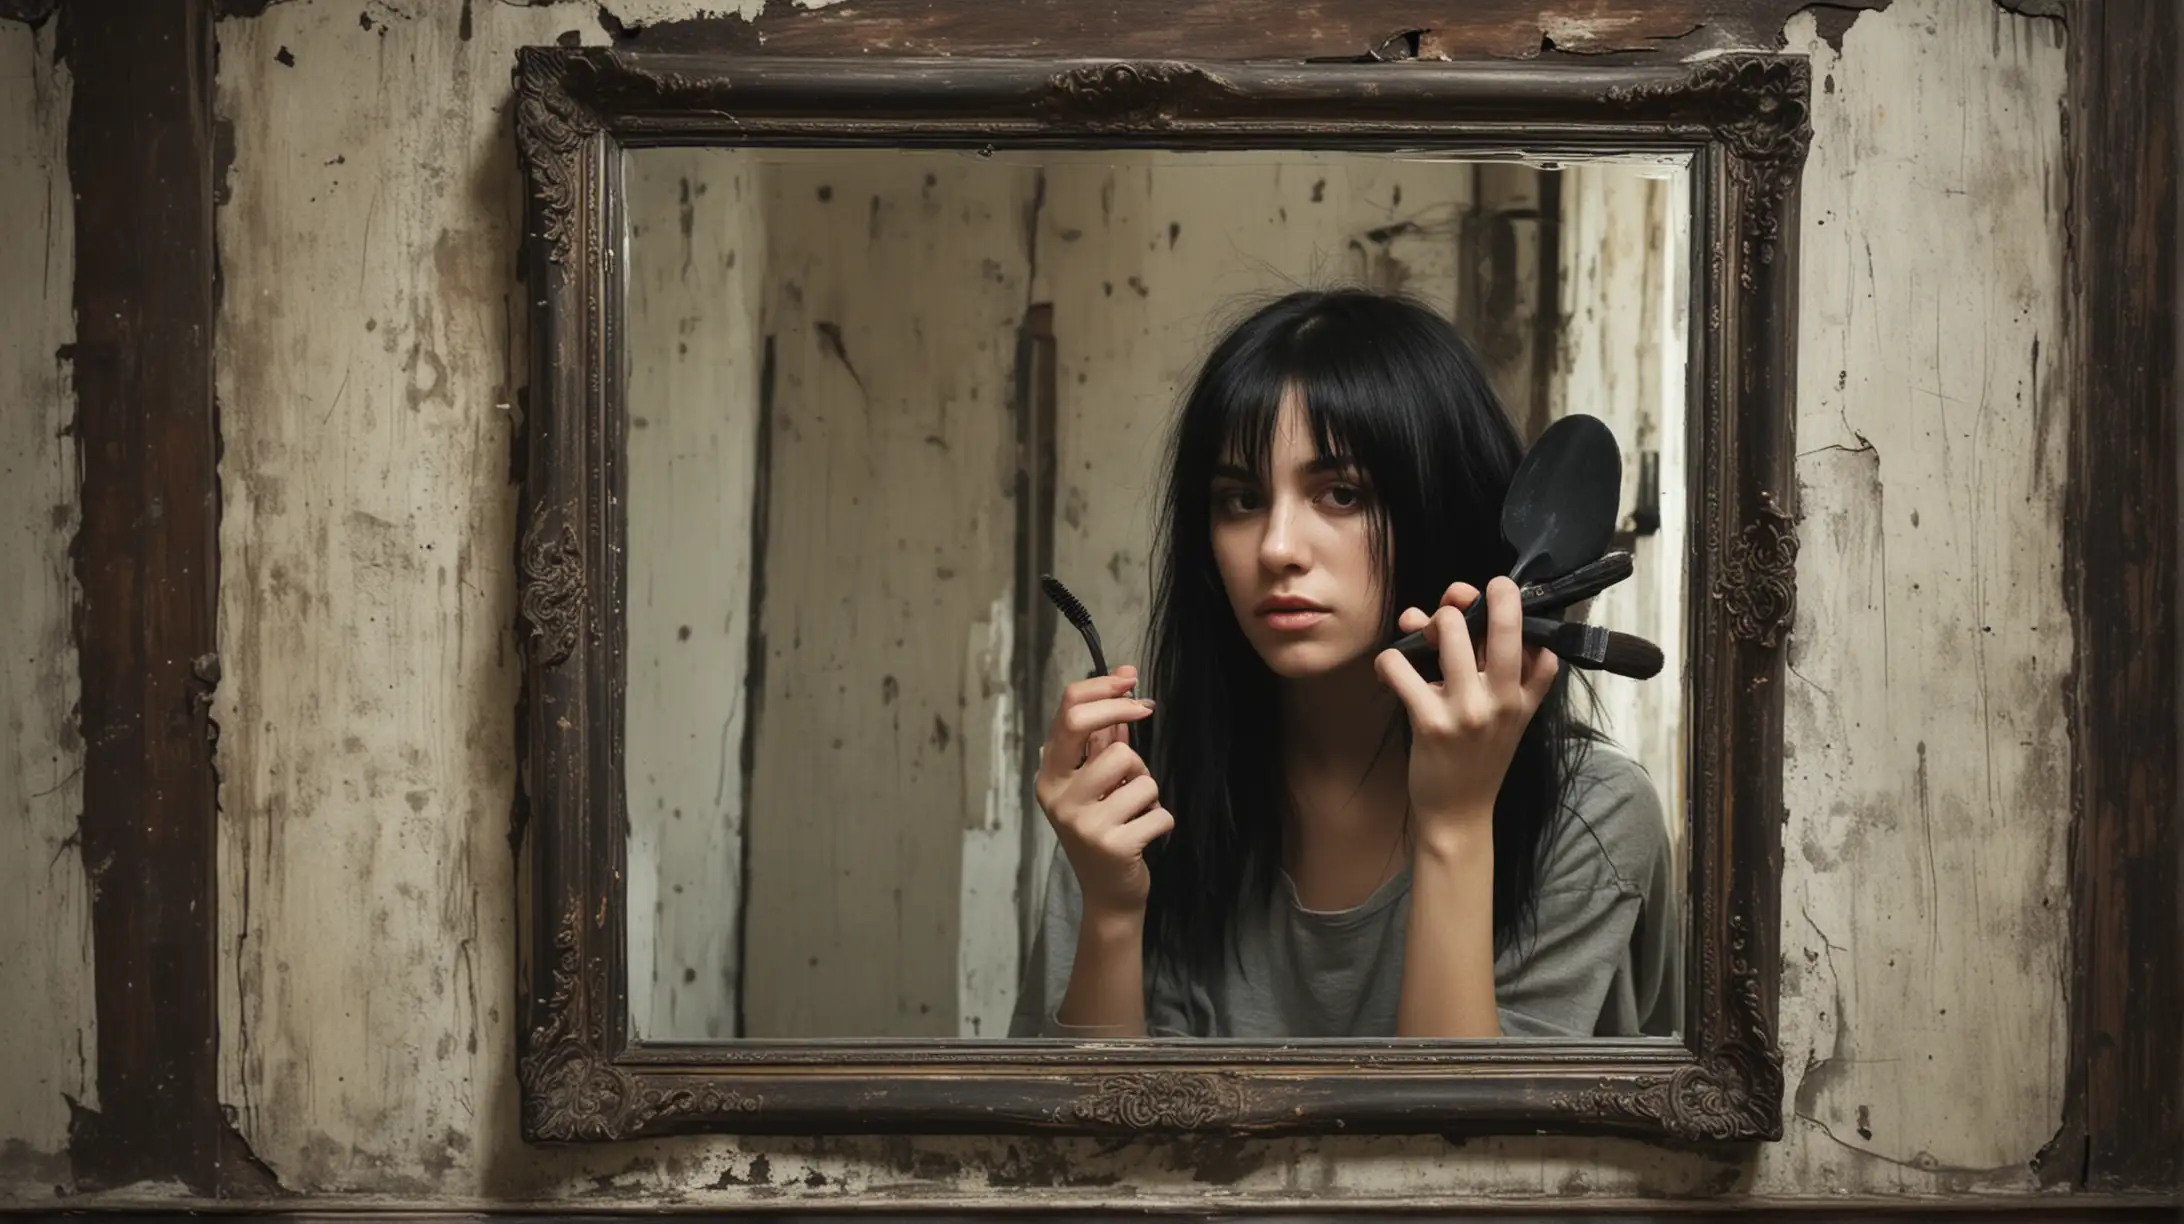 Young Woman with Black Hair Brushes Hair in Vintage Mirror Grunge Reflections